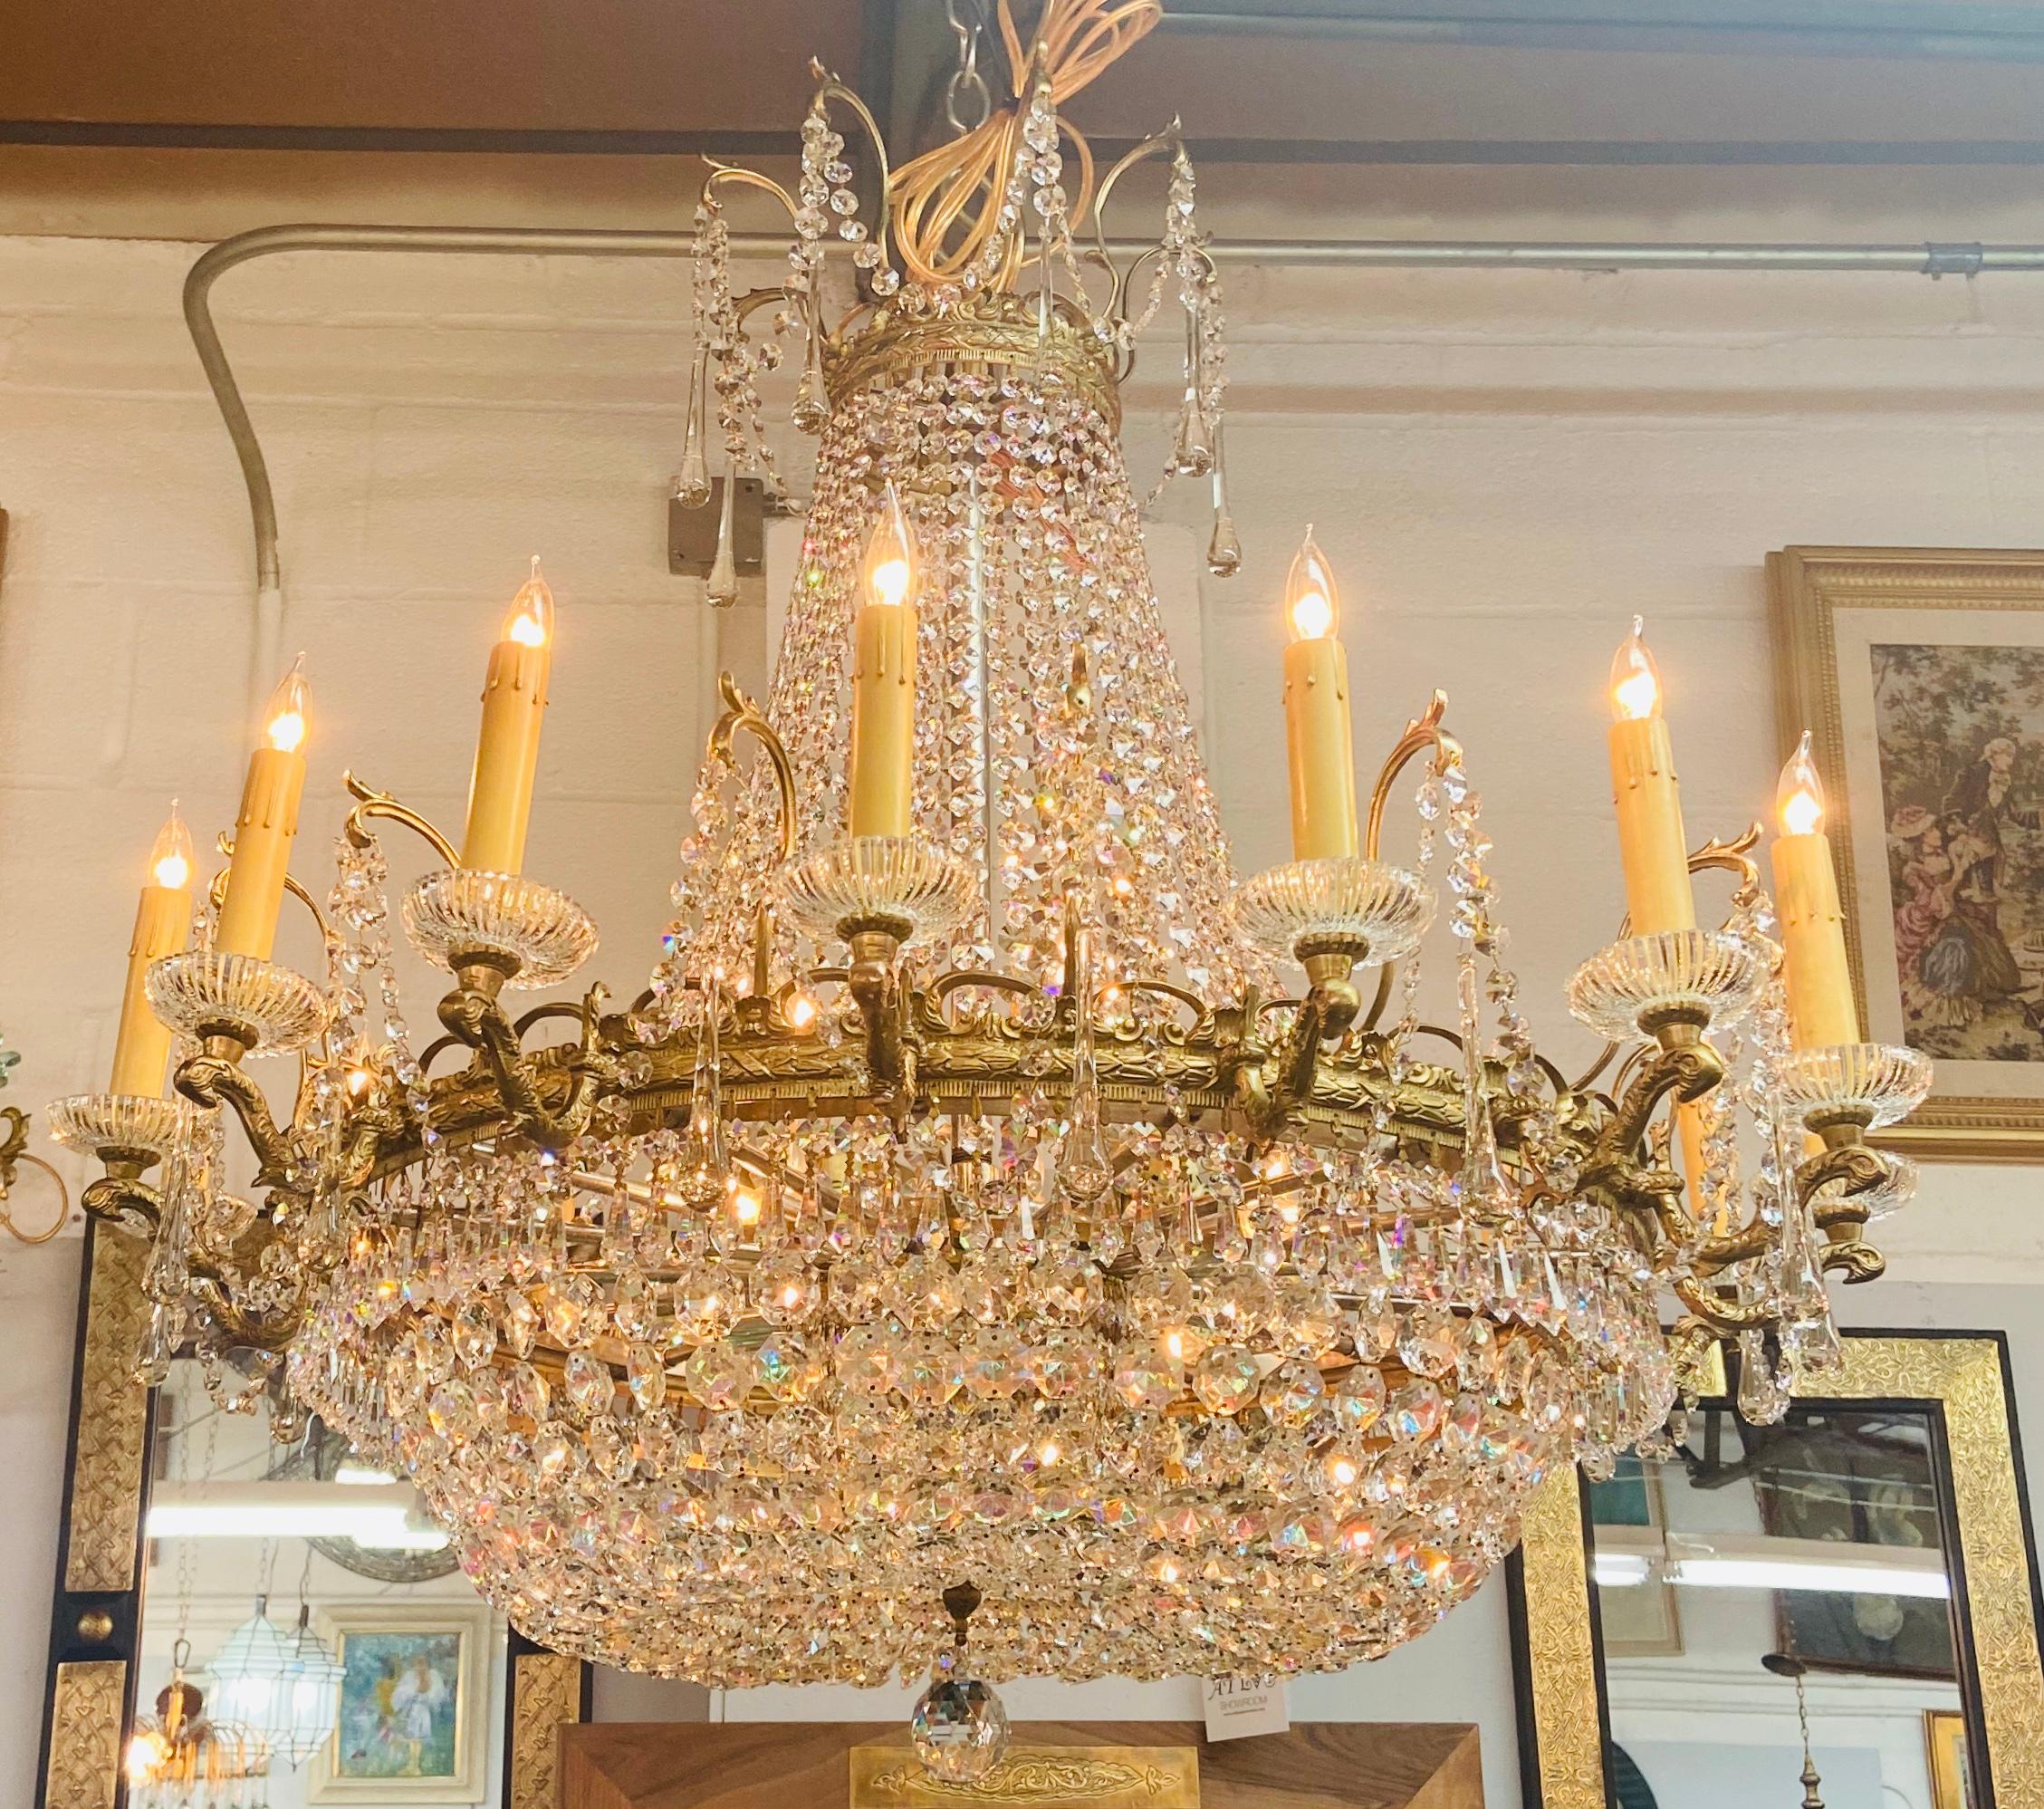 A magnificent large rare 19th Century  Louis XVI style bronze and crystal chandelier with 16 arms/ candelabras and electrified inside with 7 candelabra light source.
The basket shaped chandelier features multiple crystal strands and a bronze band in